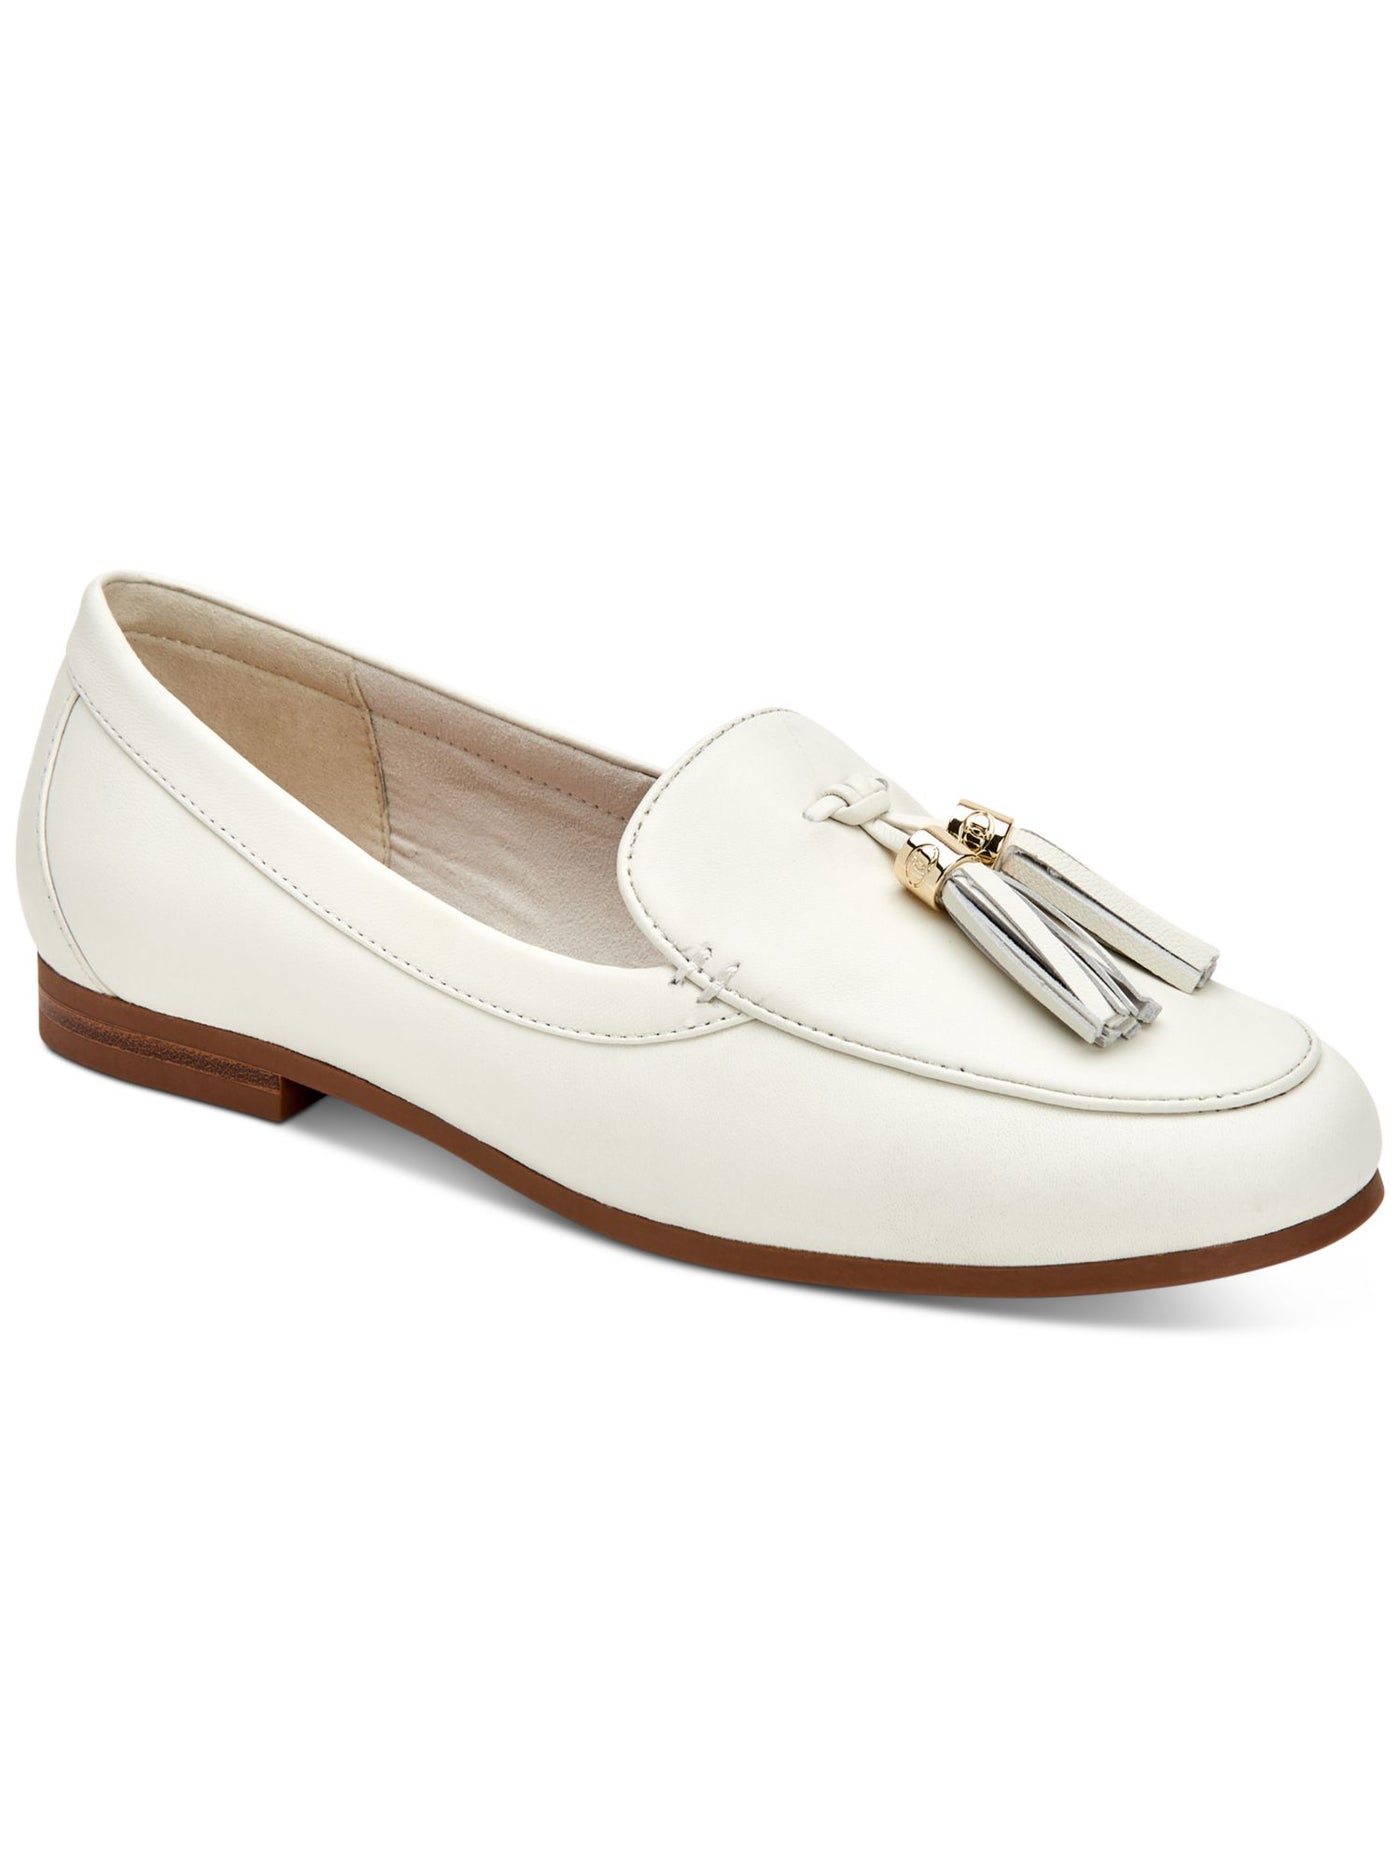 CHARTER CLUB Womens Ivory Silver Toned Hardware Tasseled Cushioned Margott Round Toe Block Heel Slip On Leather Loafers Shoes 8 M